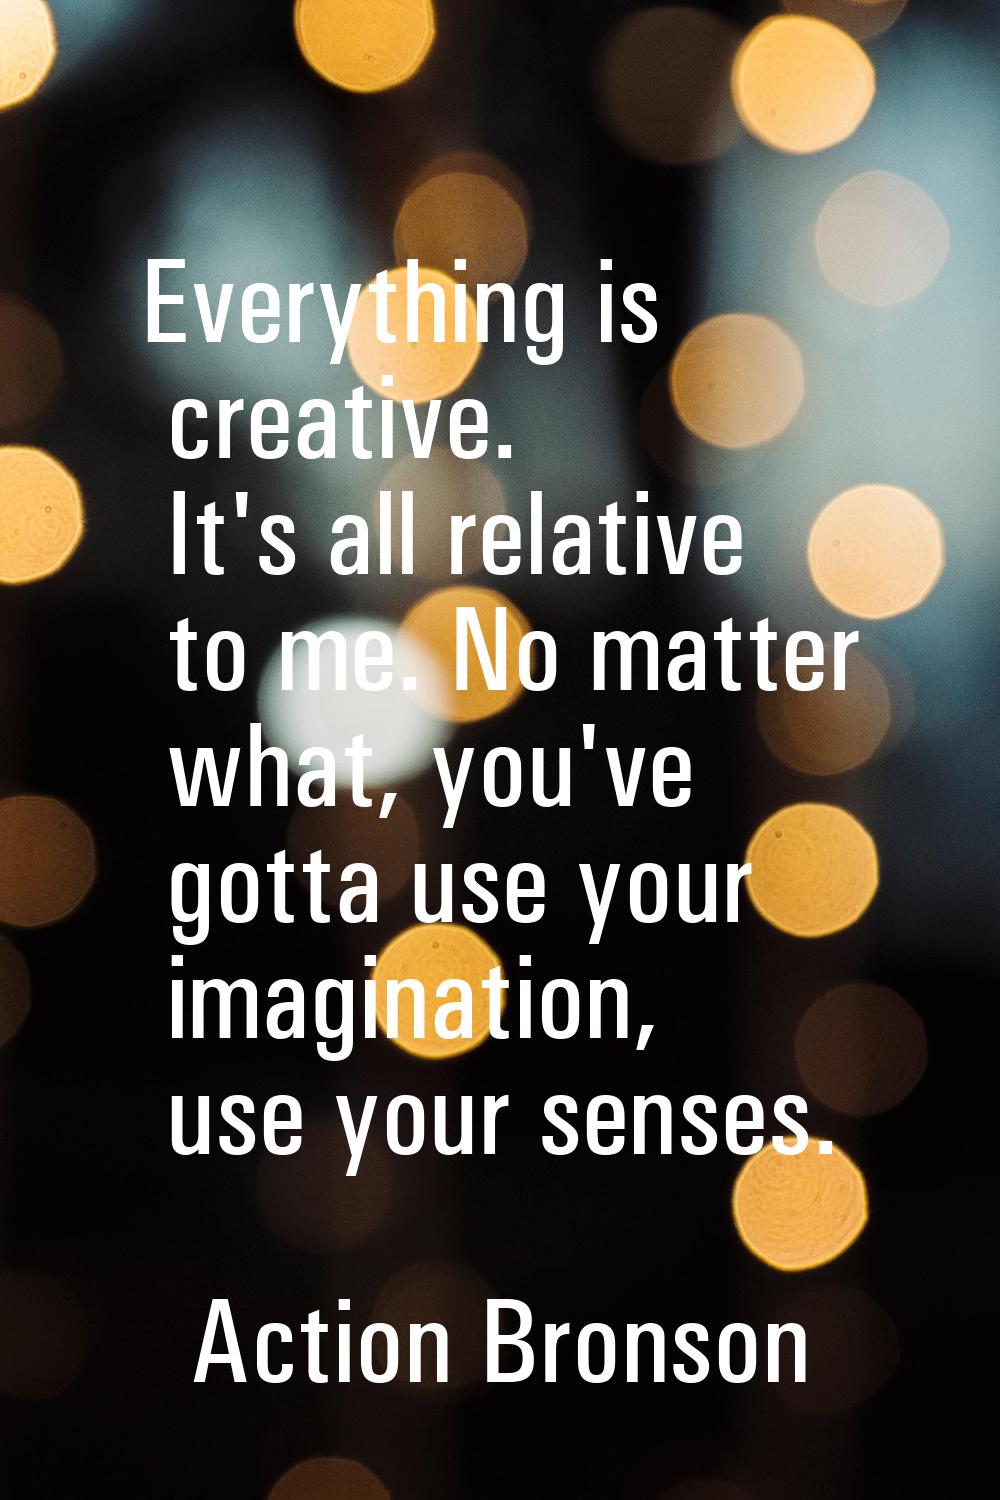 Everything is creative. It's all relative to me. No matter what, you've gotta use your imagination,